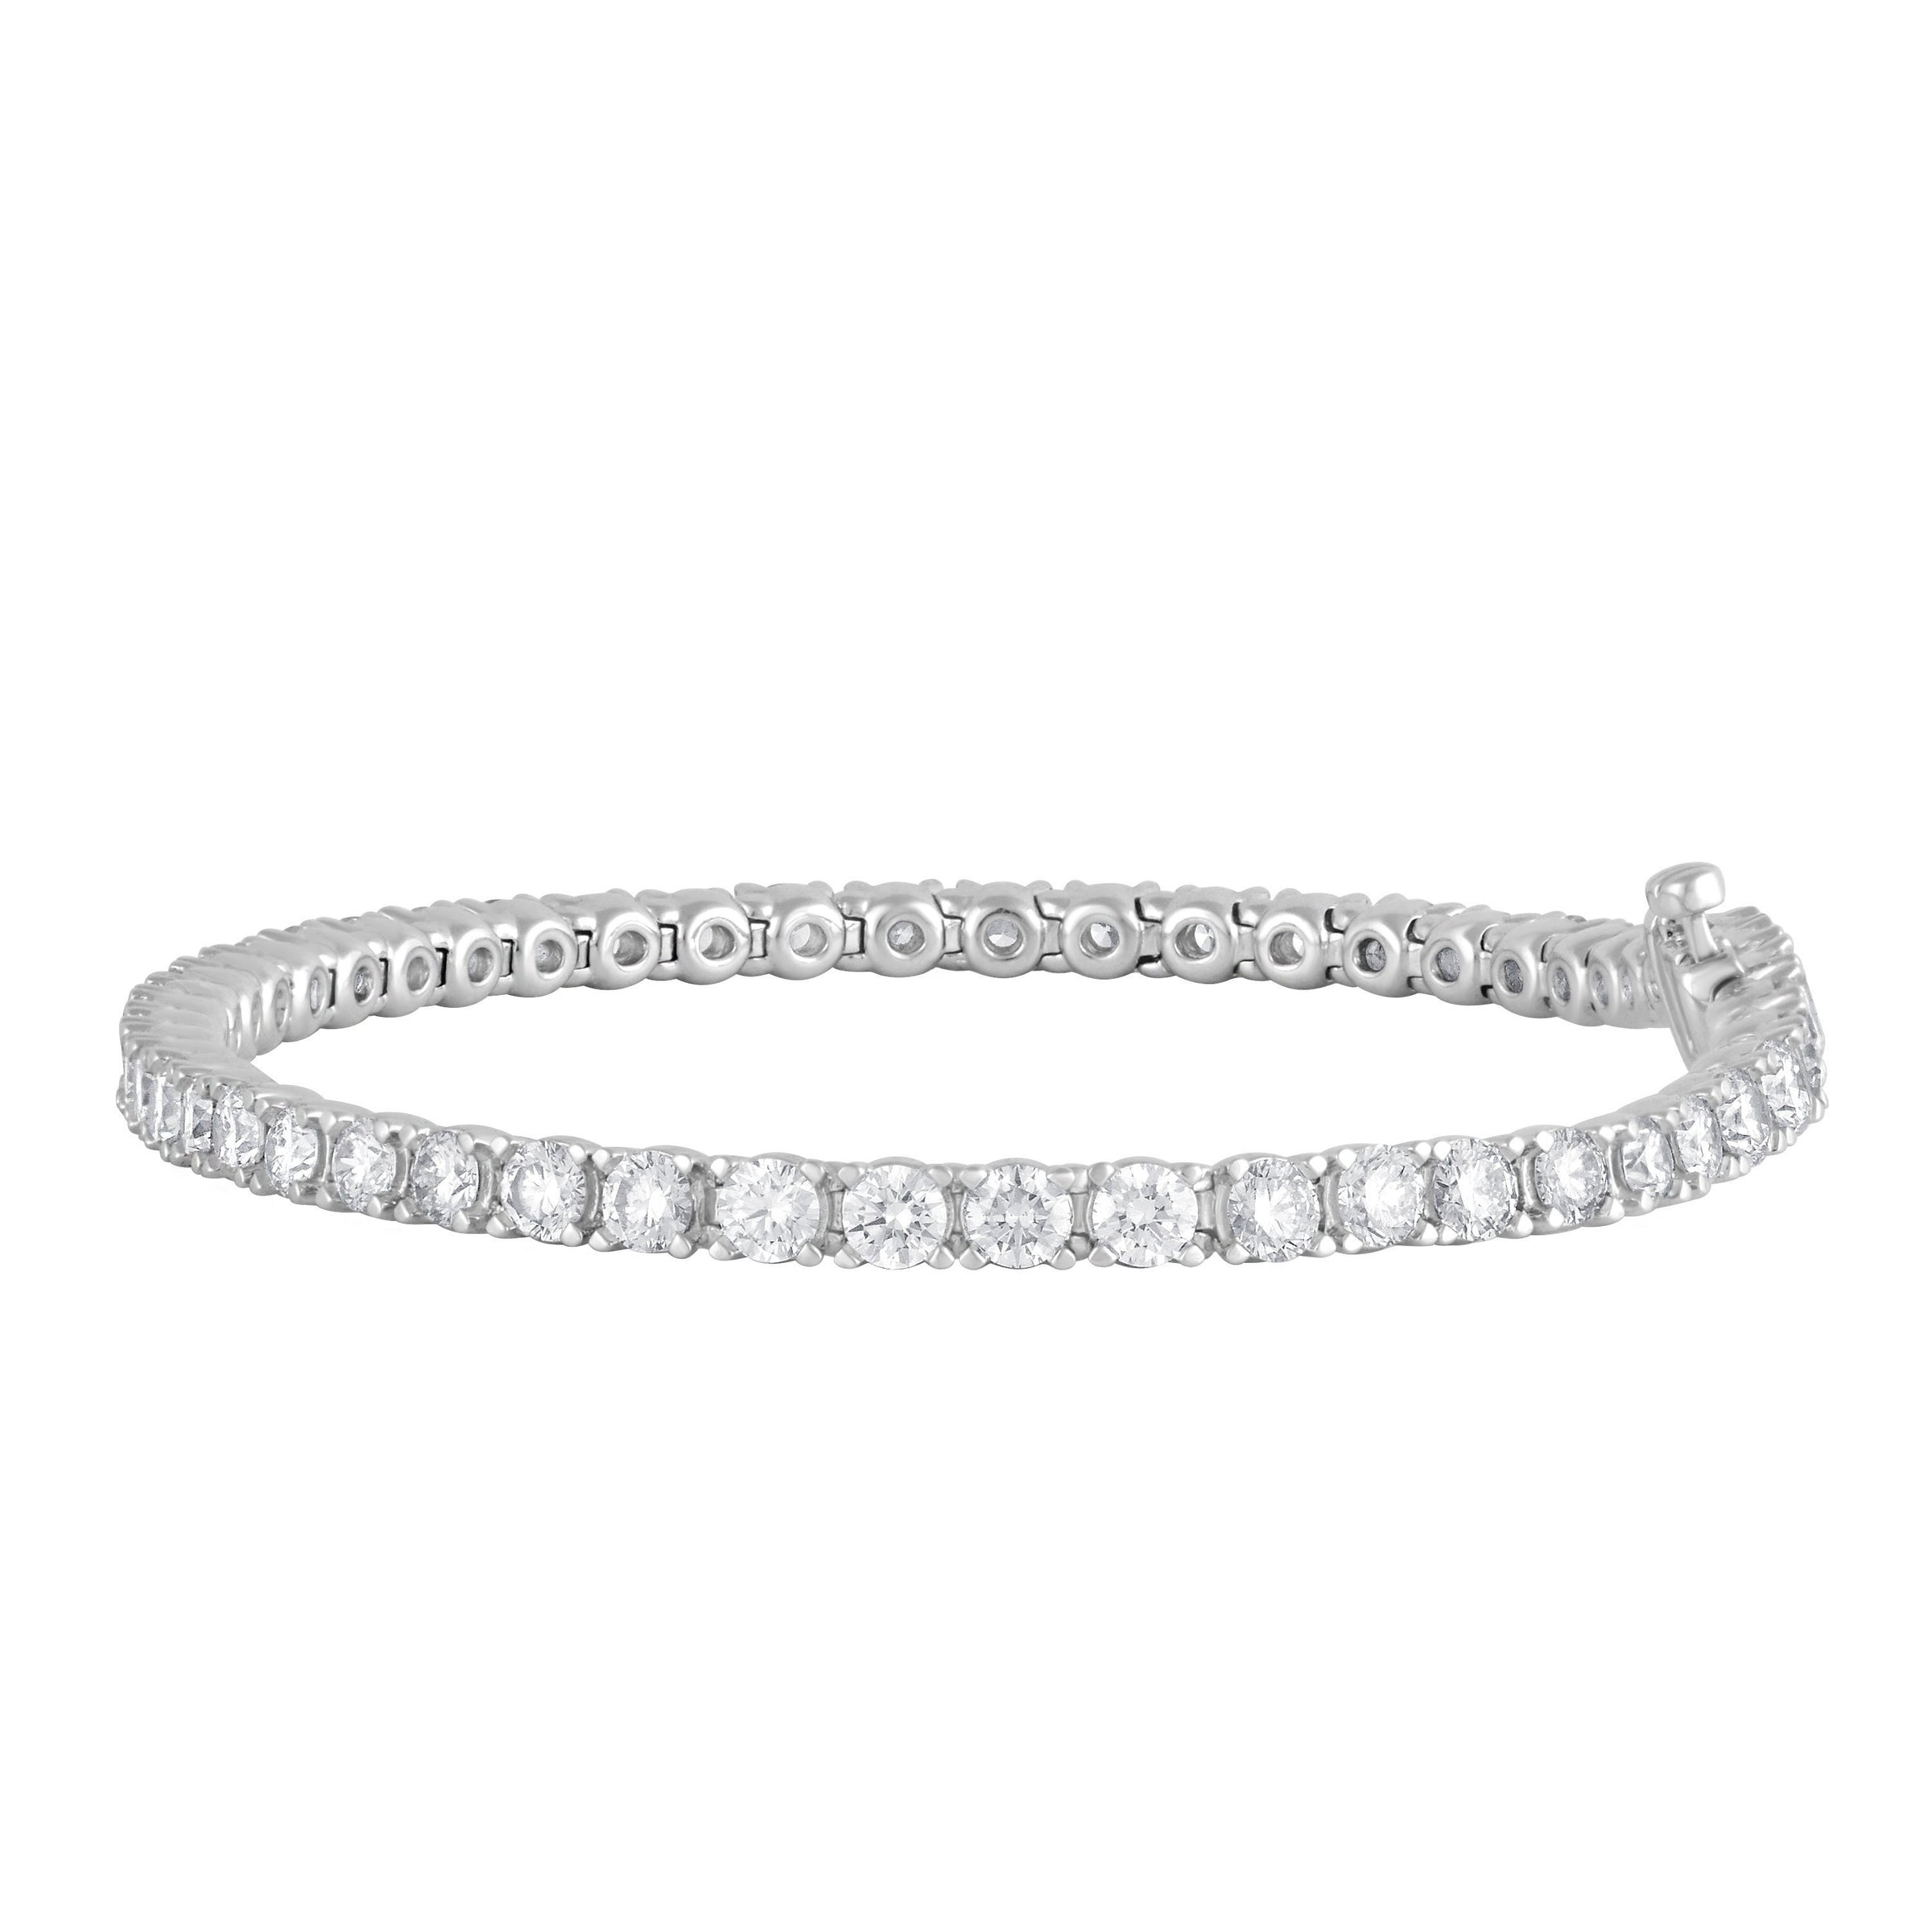 Mirage Tennis Bracelet with 5.00ct of Laboratory Grown Diamonds in Sterling Silver and Platinum Bracelets Mirage 